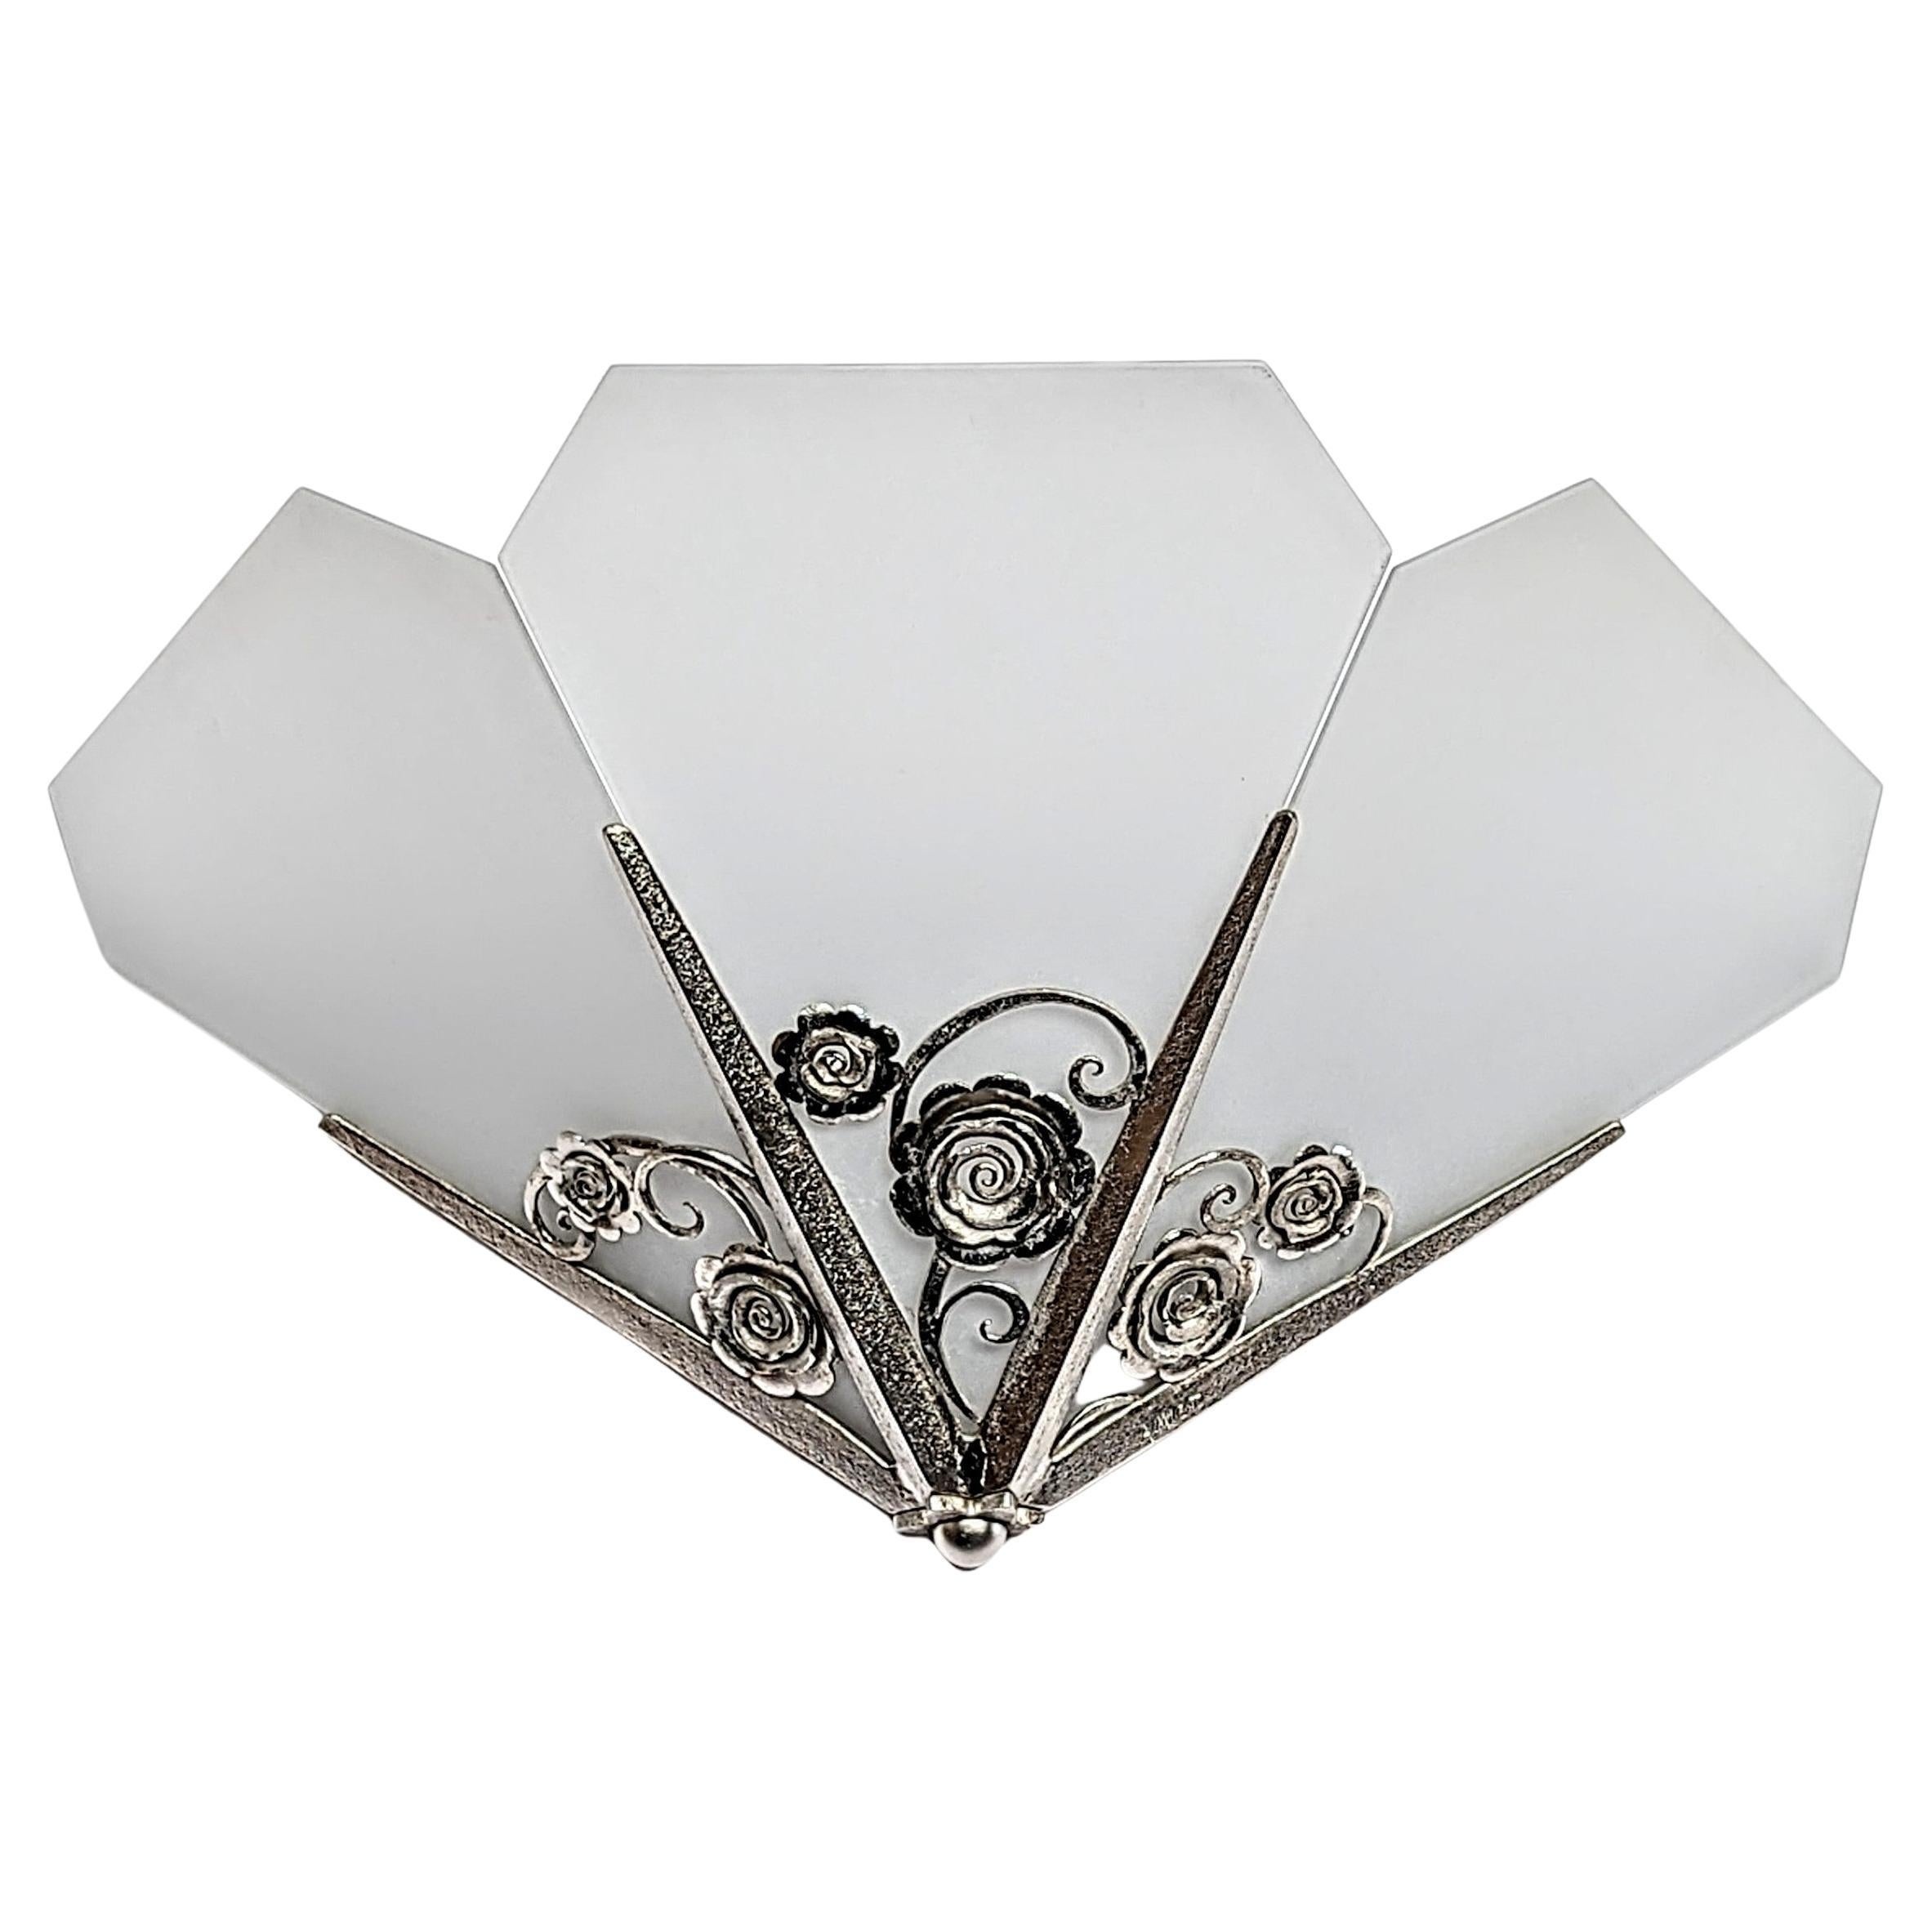 Pair of French Art Deco Wall Sconces Signed by Amiot (Matching Chandelier) For Sale